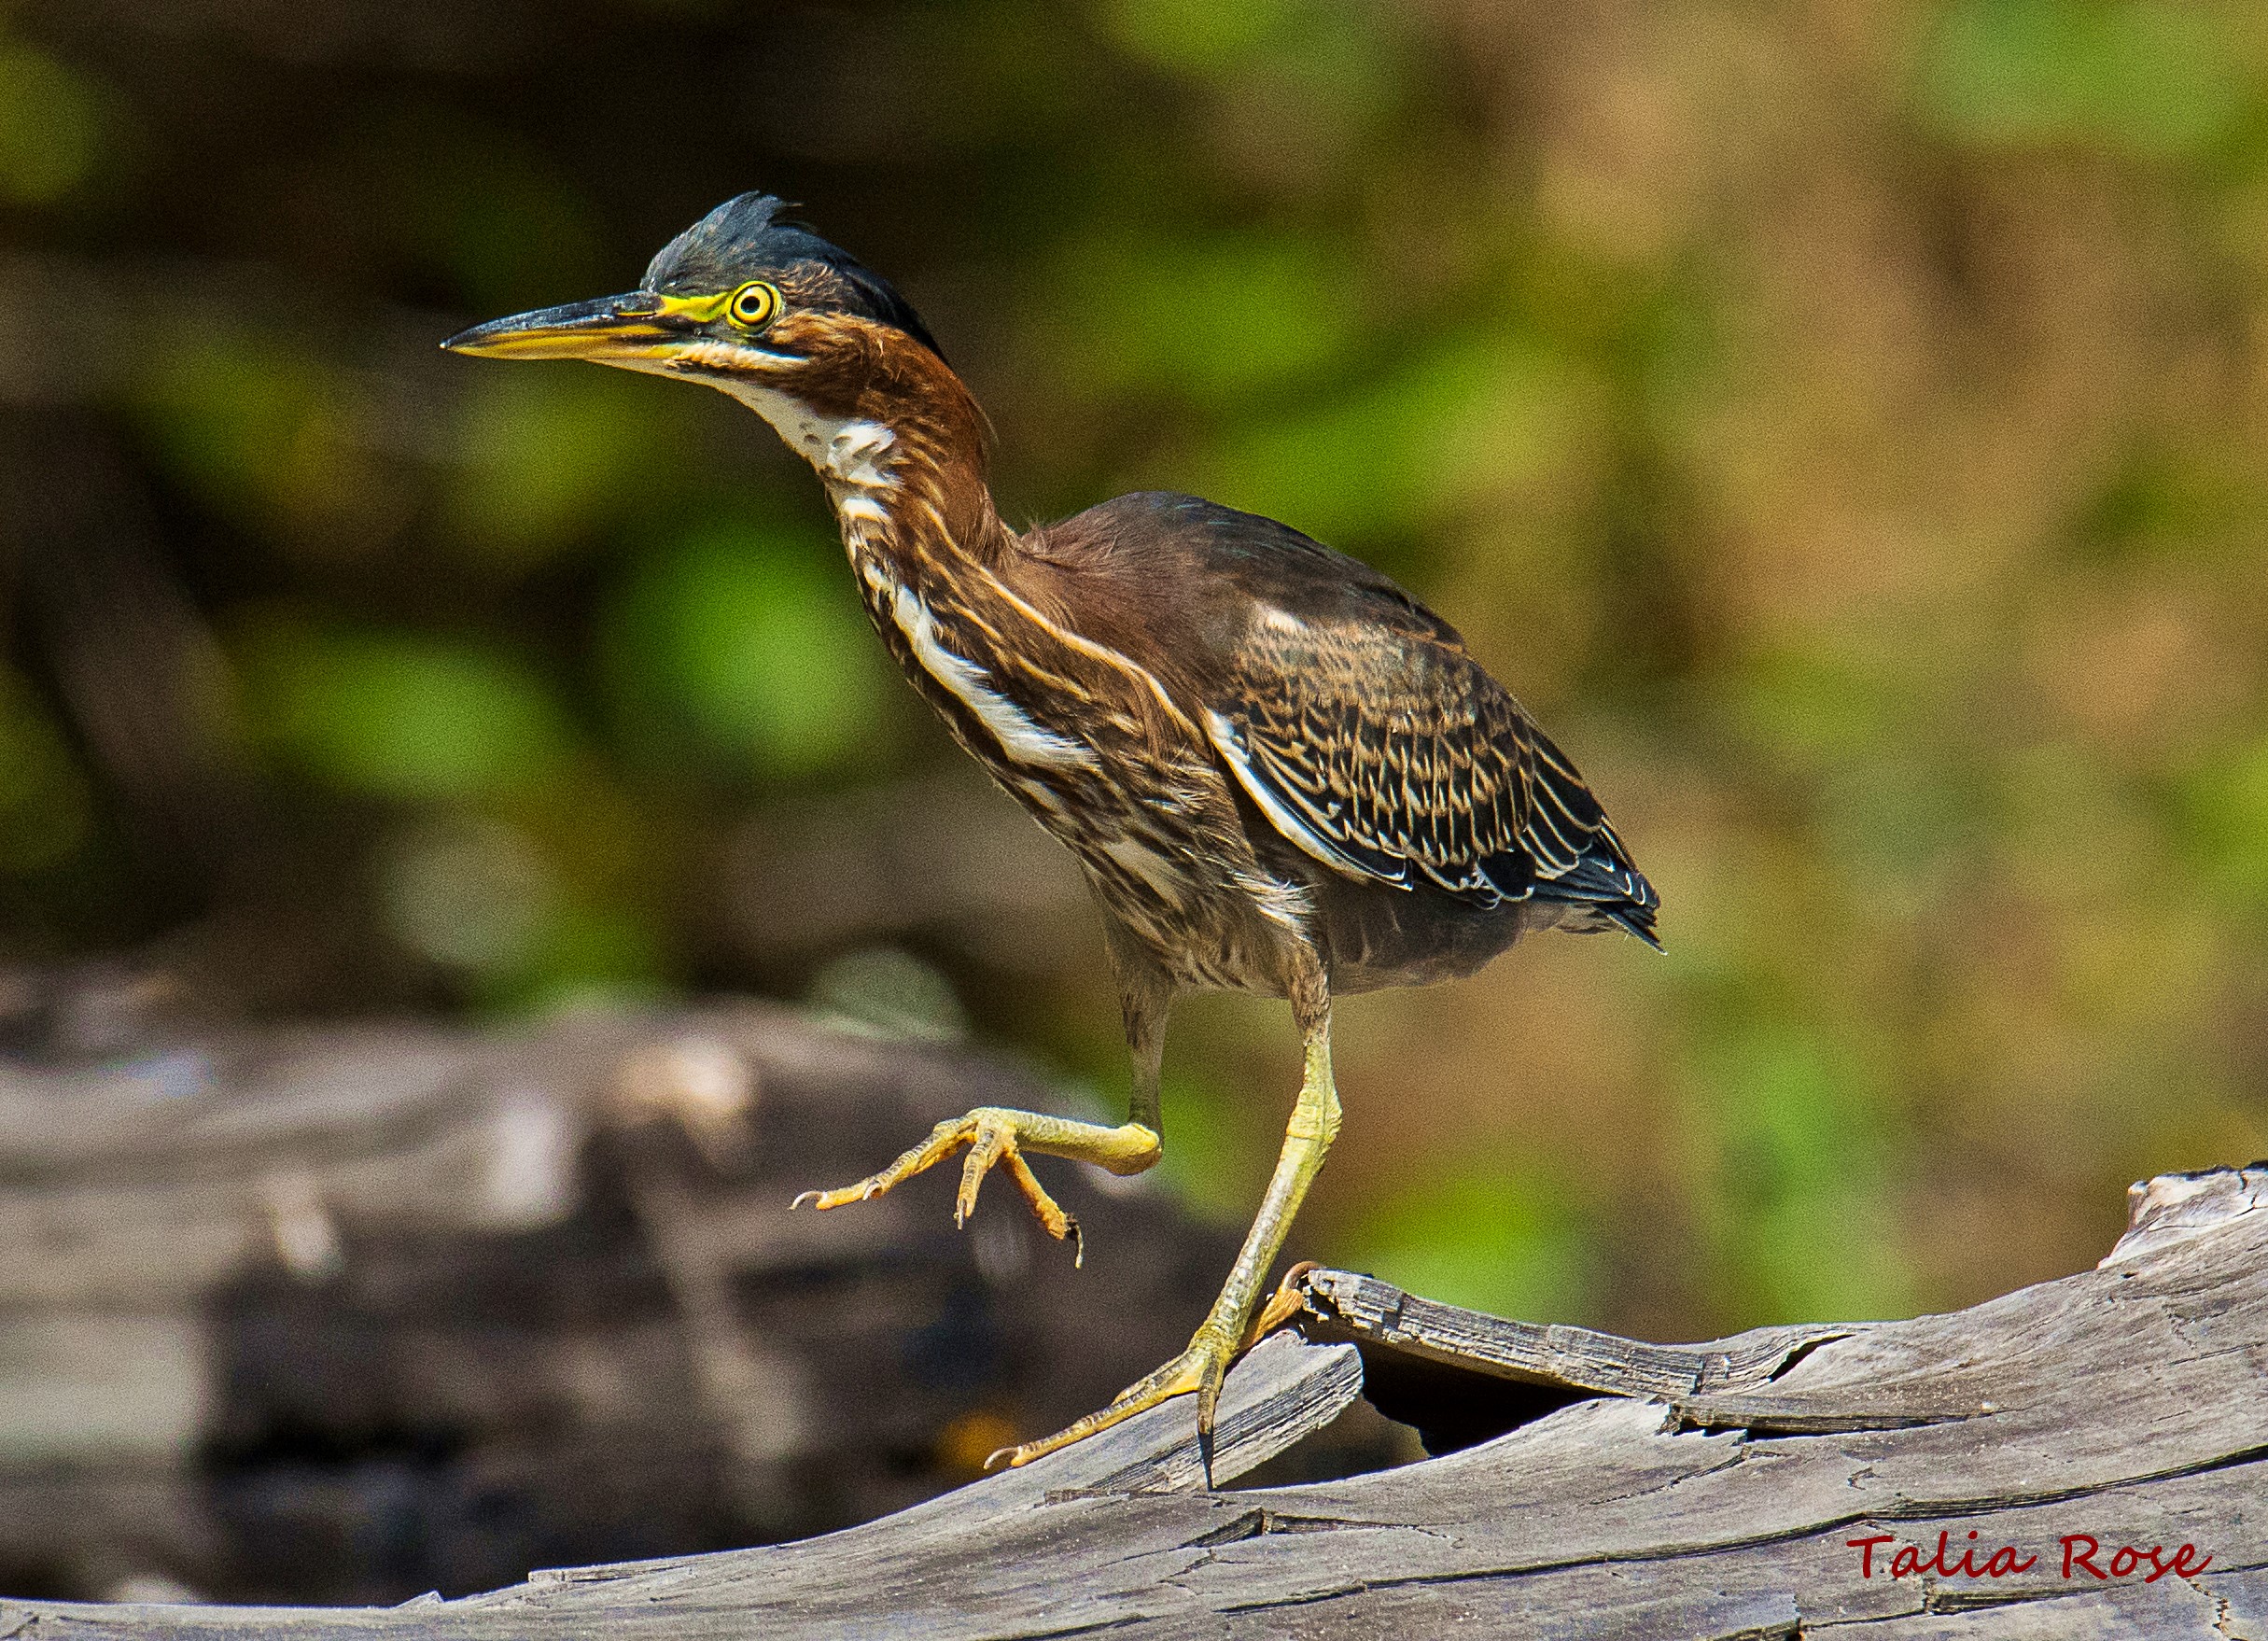 Fishing for Photos With a Green Heron - Redheaded Blackbelt